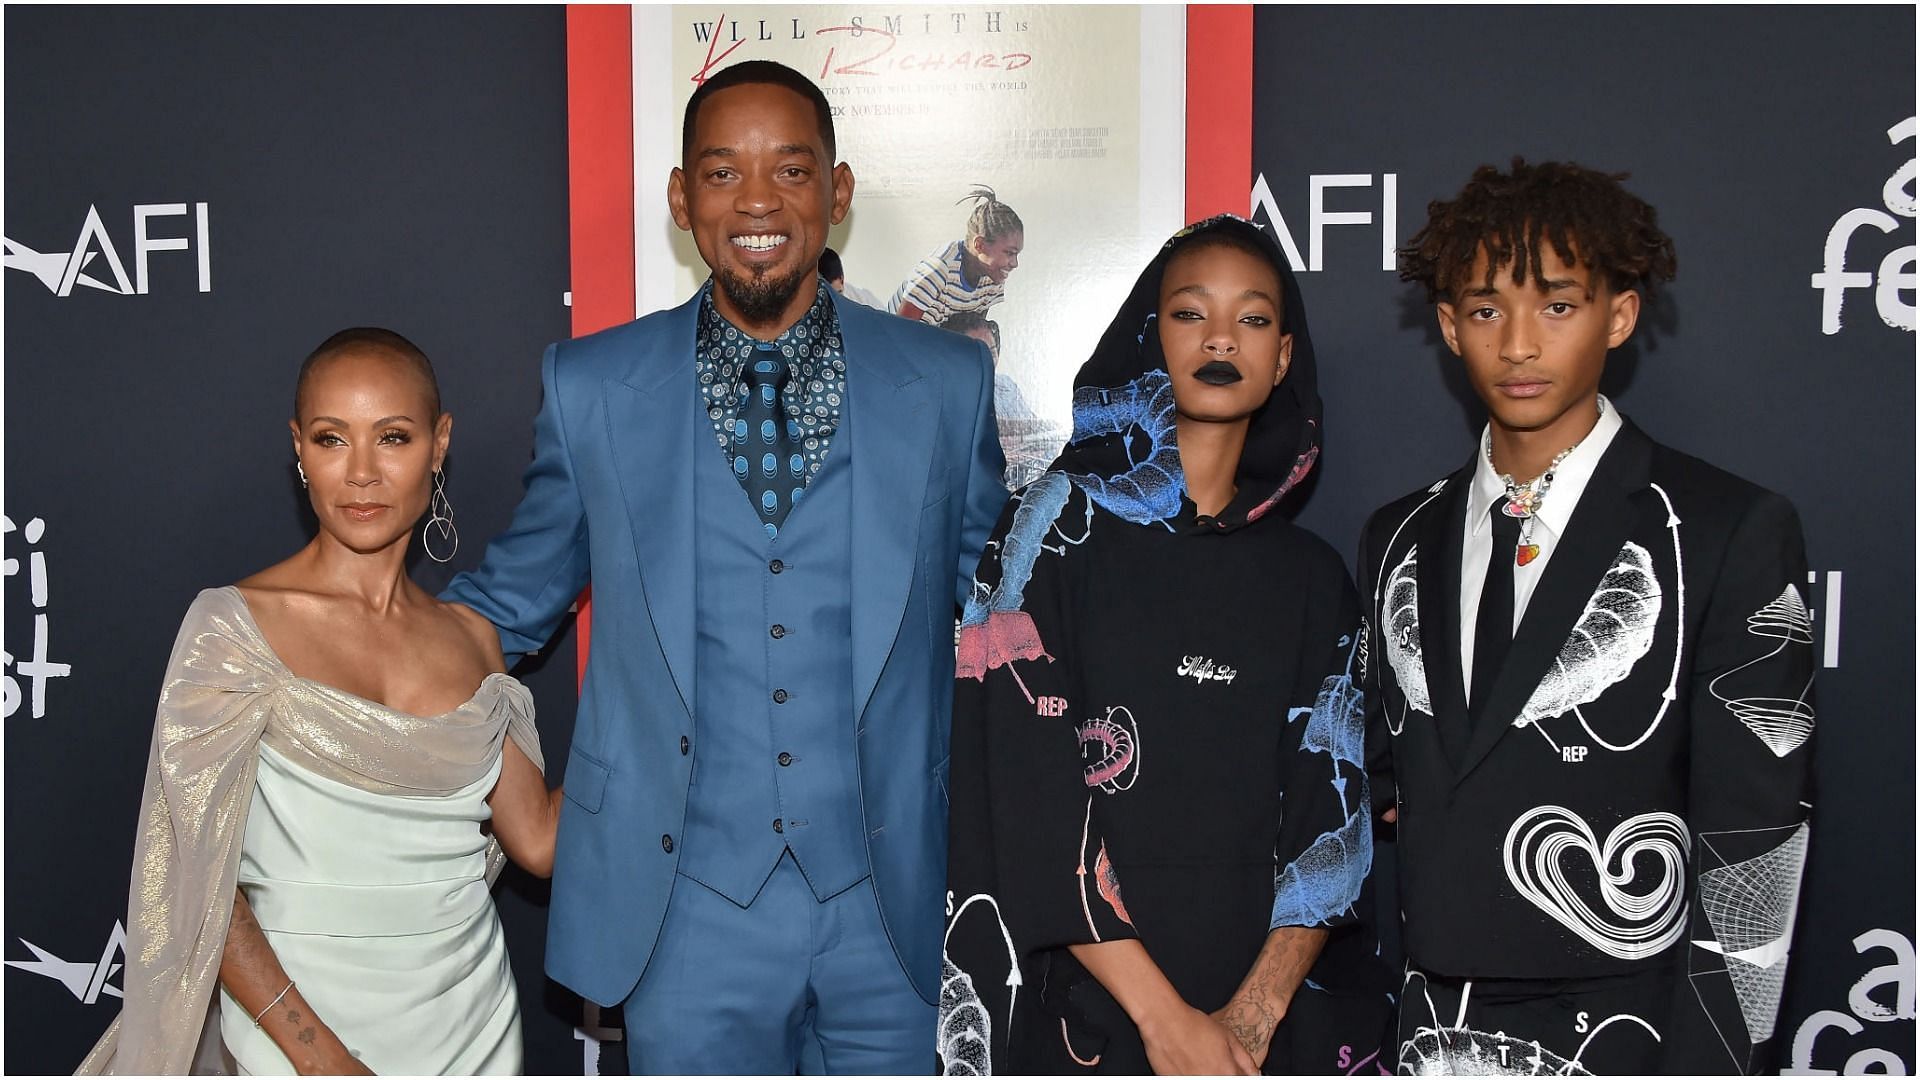 Jada Pinkett Smith, Will Smith, Willow Smith and Jaden Smith attend the AFI Fest premiere of &#039;King Richard&#039; (Image via Getty Images/Lisa O&#039;Connor)